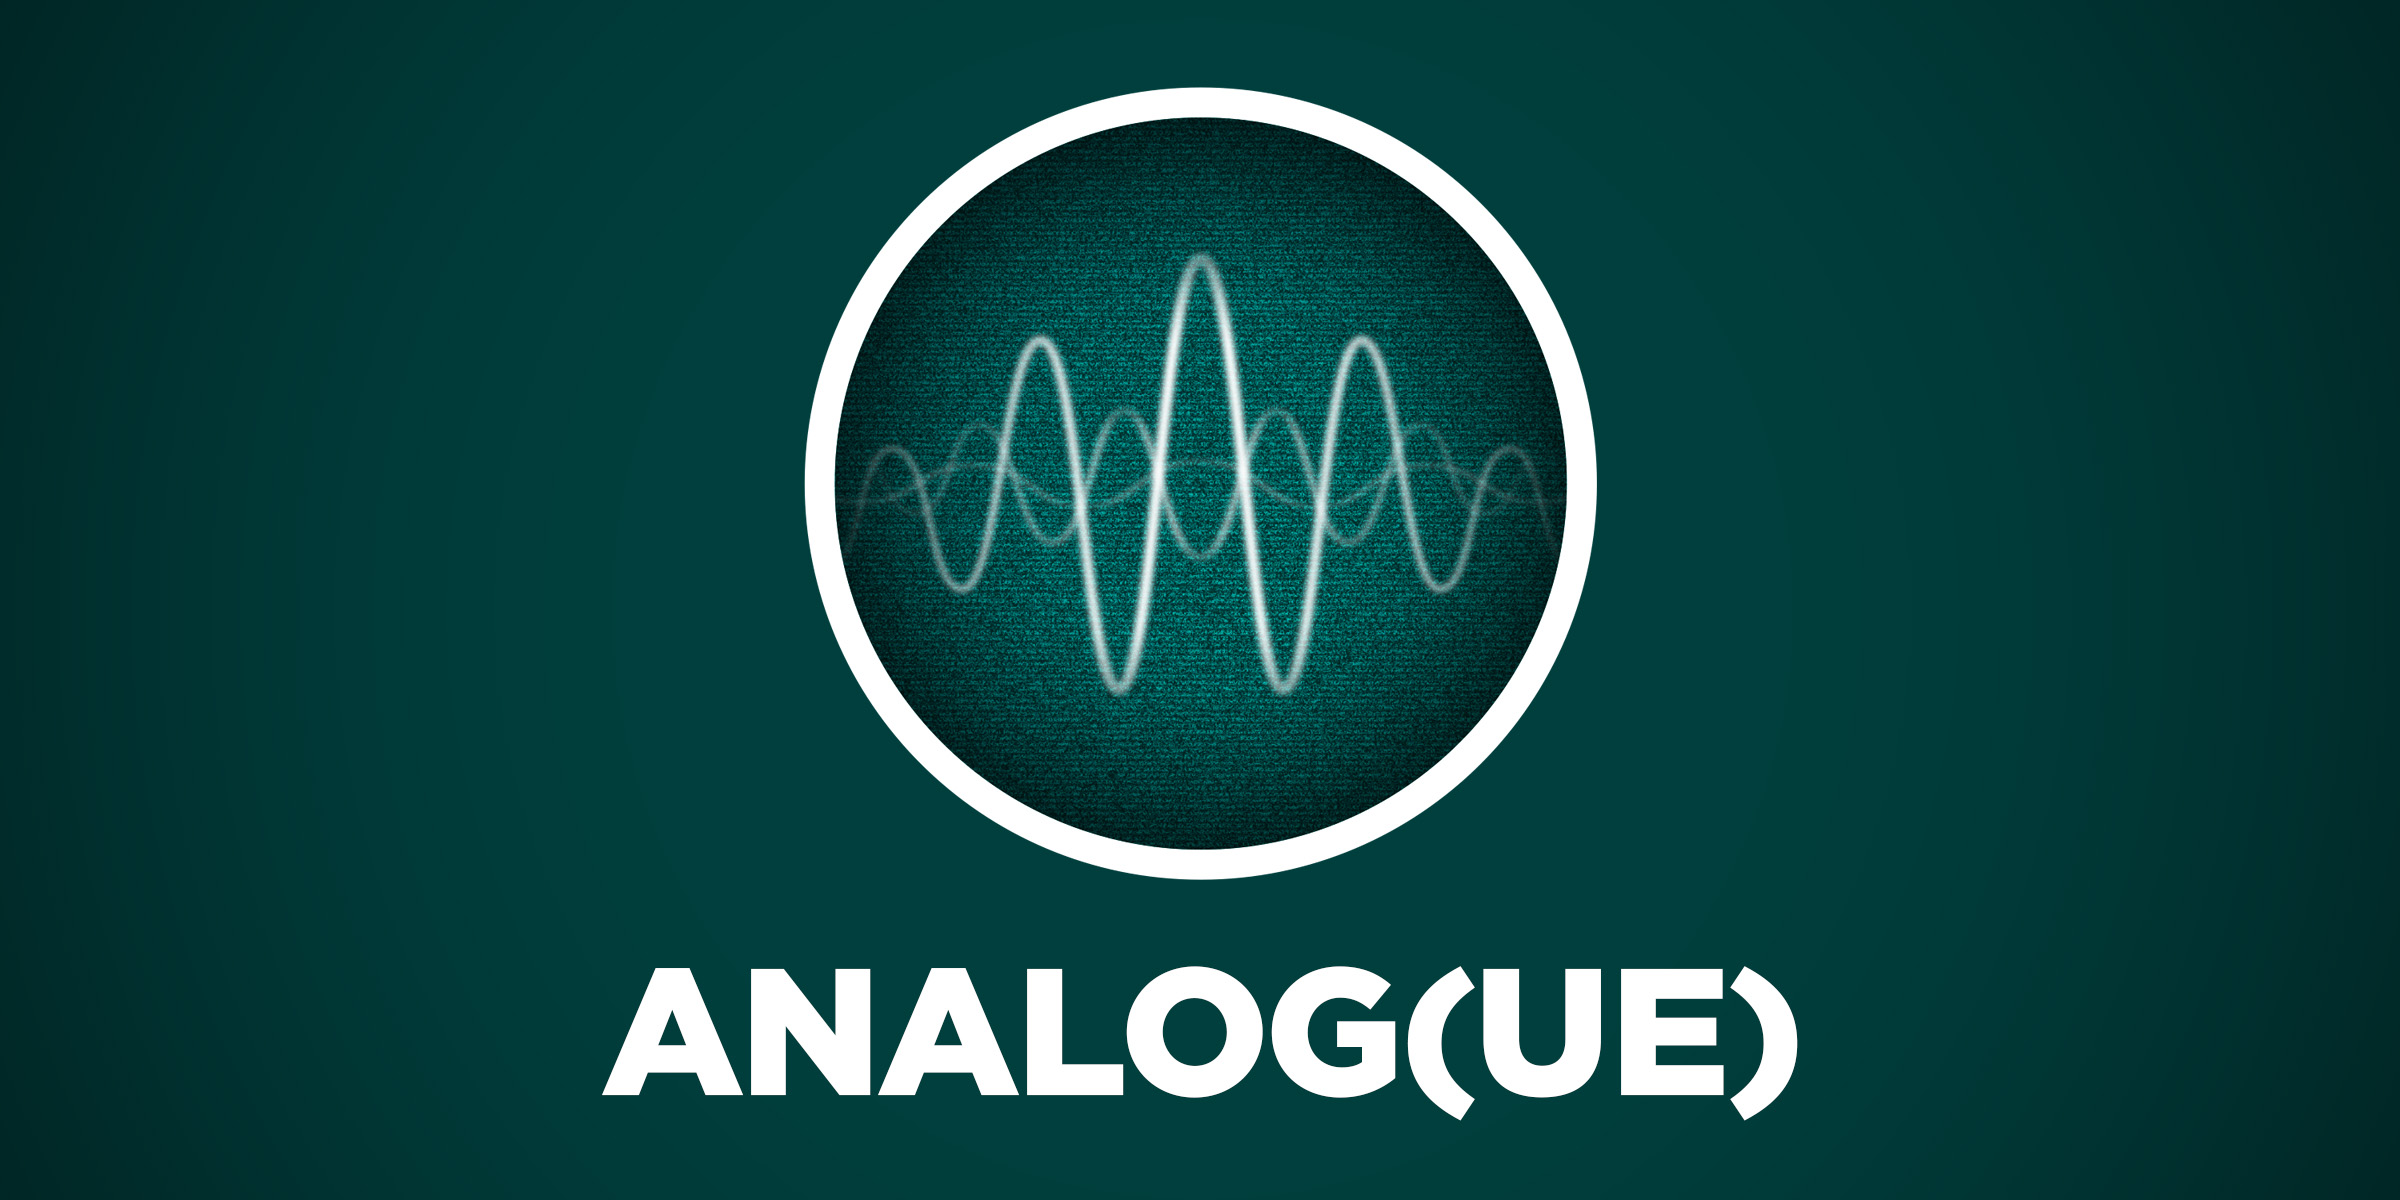 Analog(ue) #209: Casey’s Technical Support Hotline